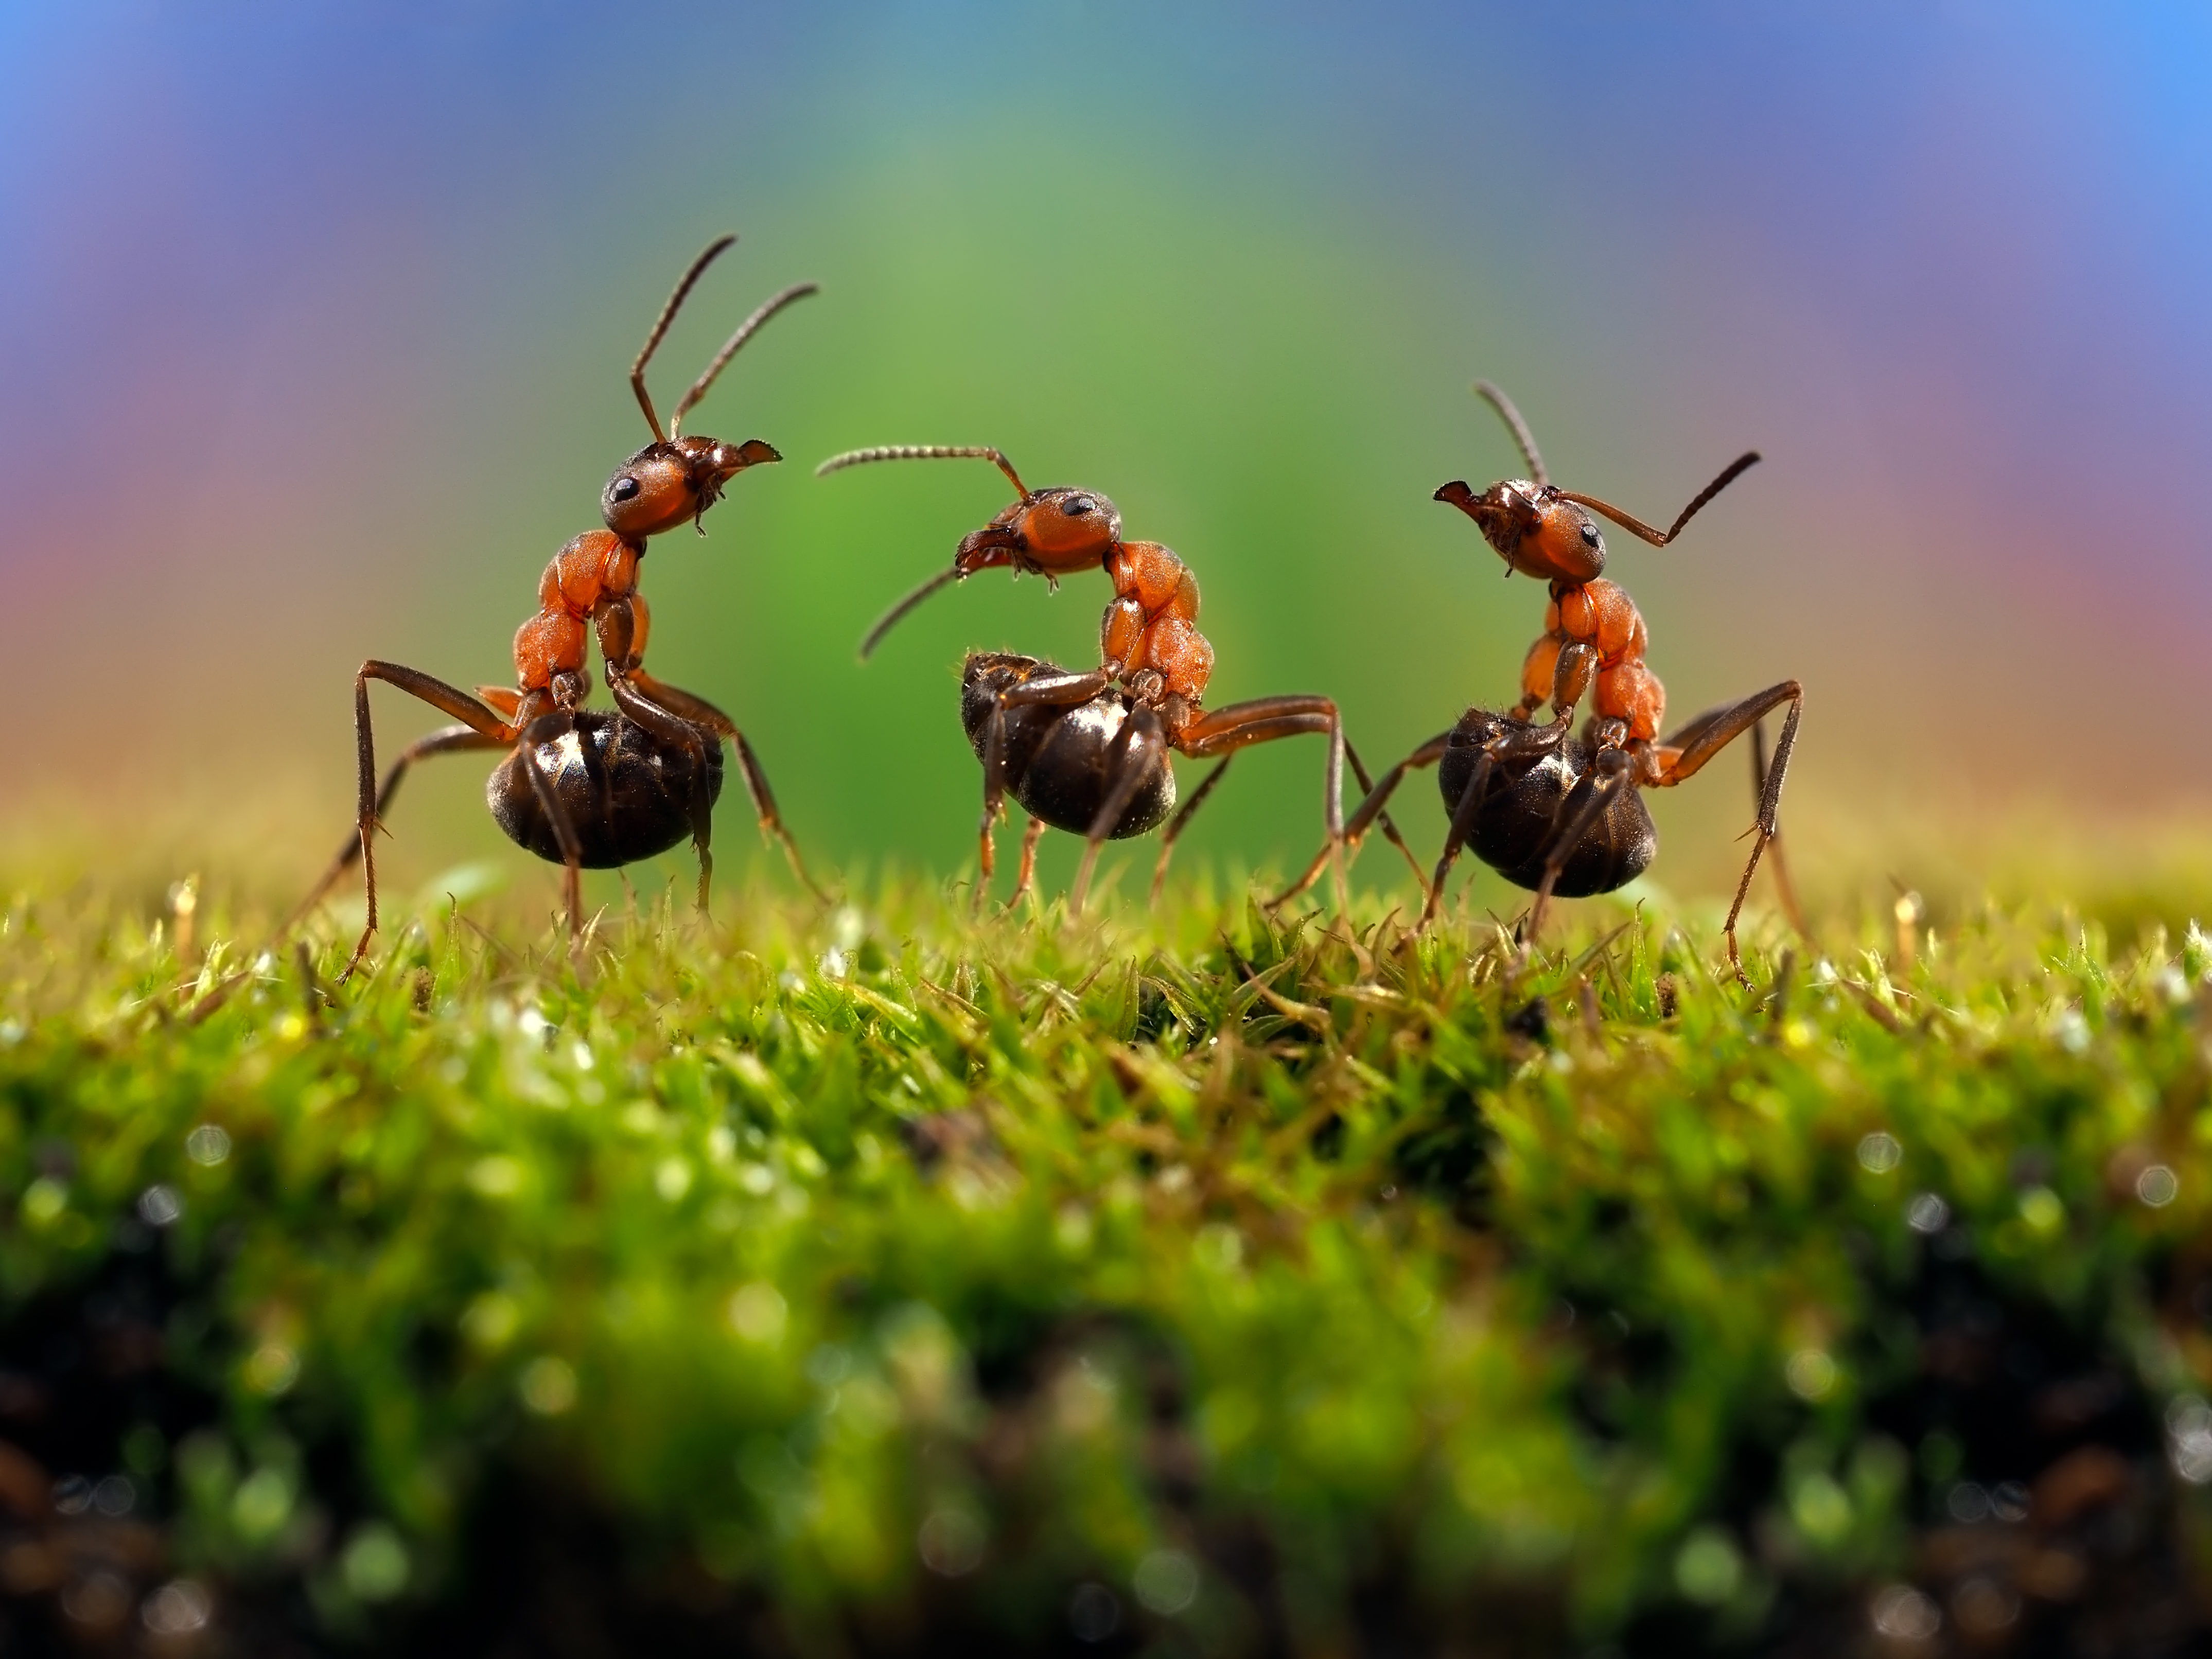 Three ant. Conflict, ants fight. Conceptually - dialogue, conversation, meeting, showdown, difficult negotiations. Beautiful rainbow background. Ants large, raised abdomens